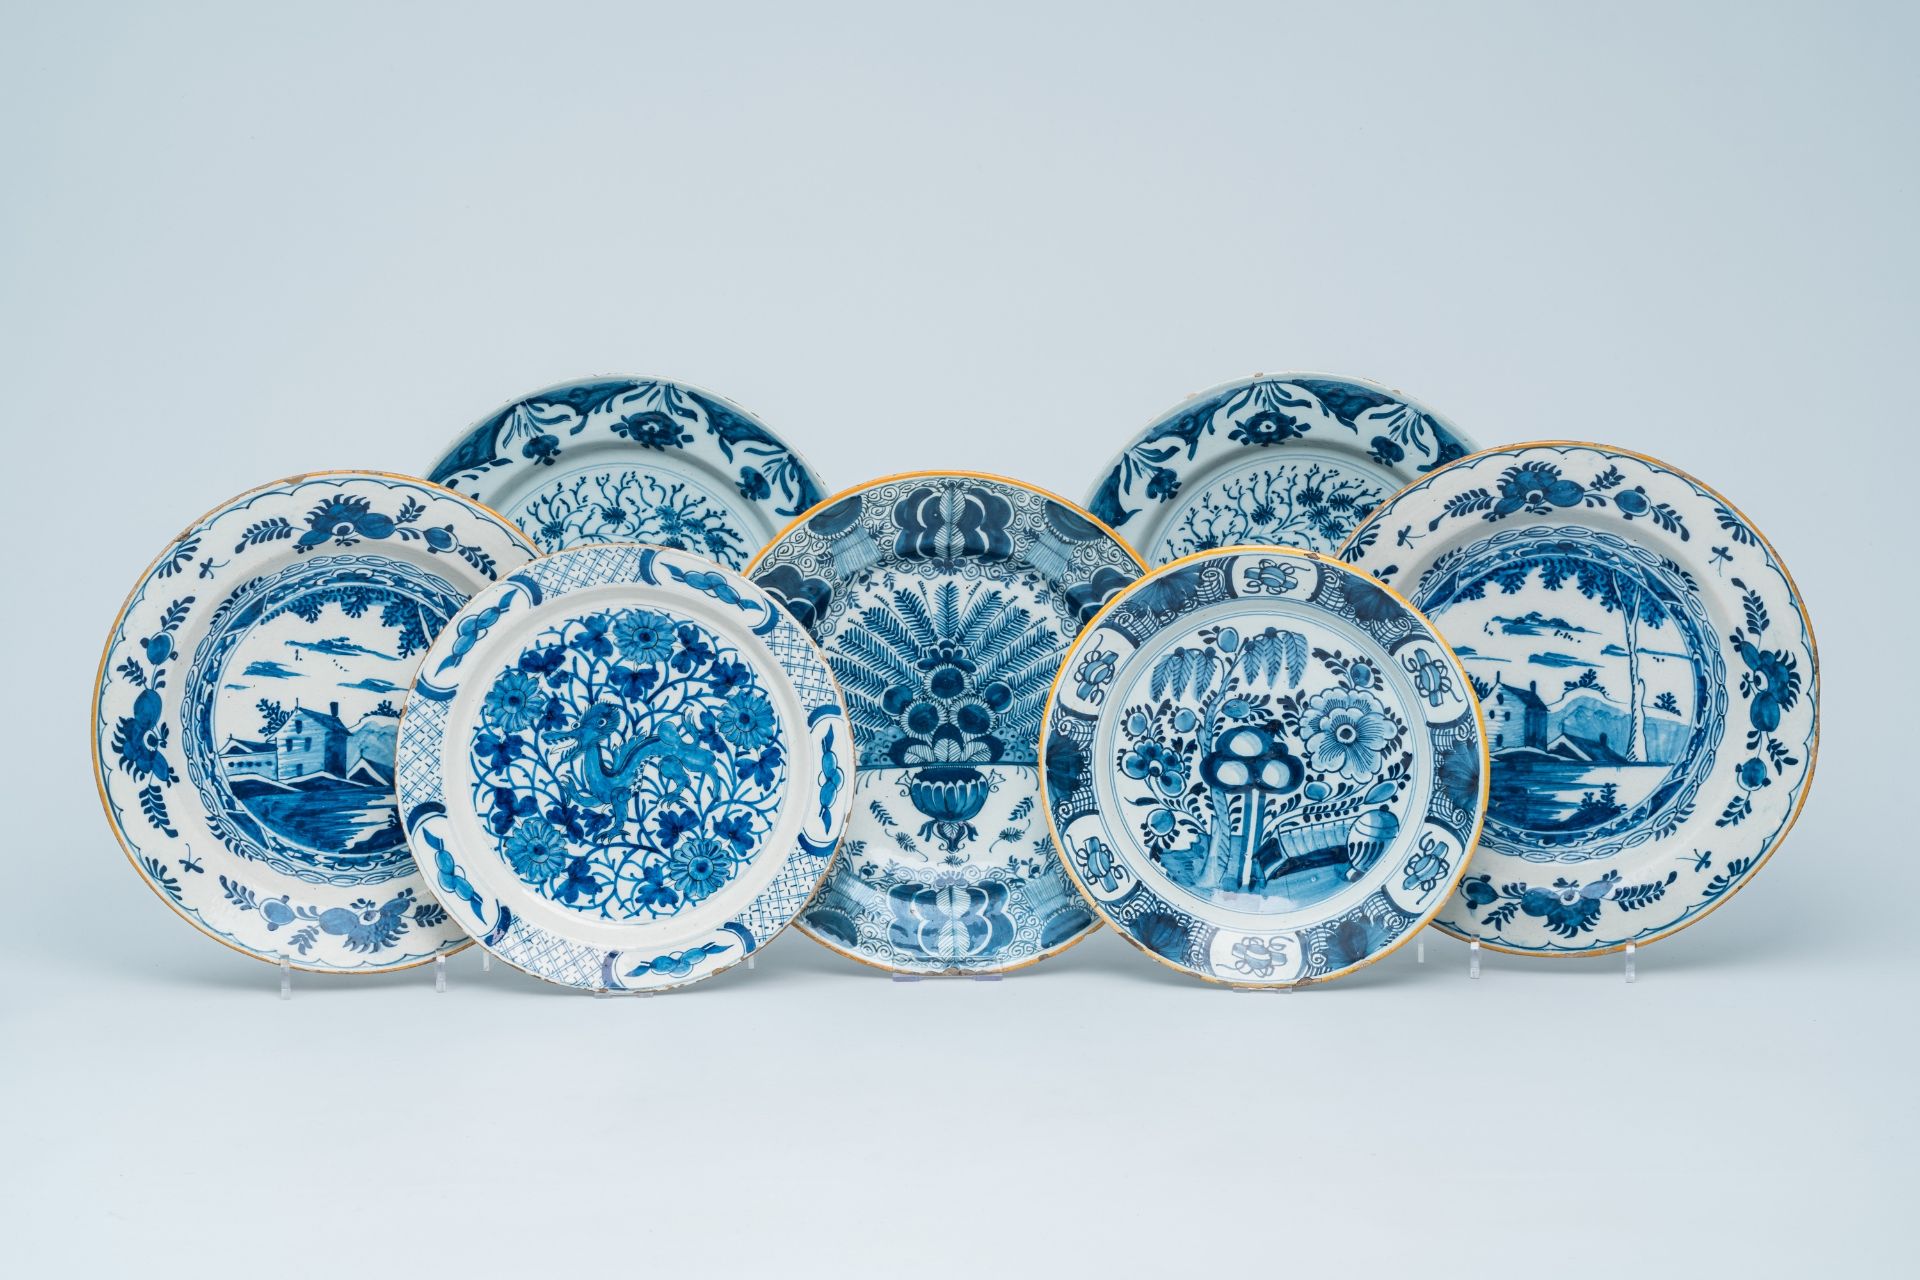 Seven various Dutch Delft blue and white chargers with landscapes, a dragon and floral design, 18th